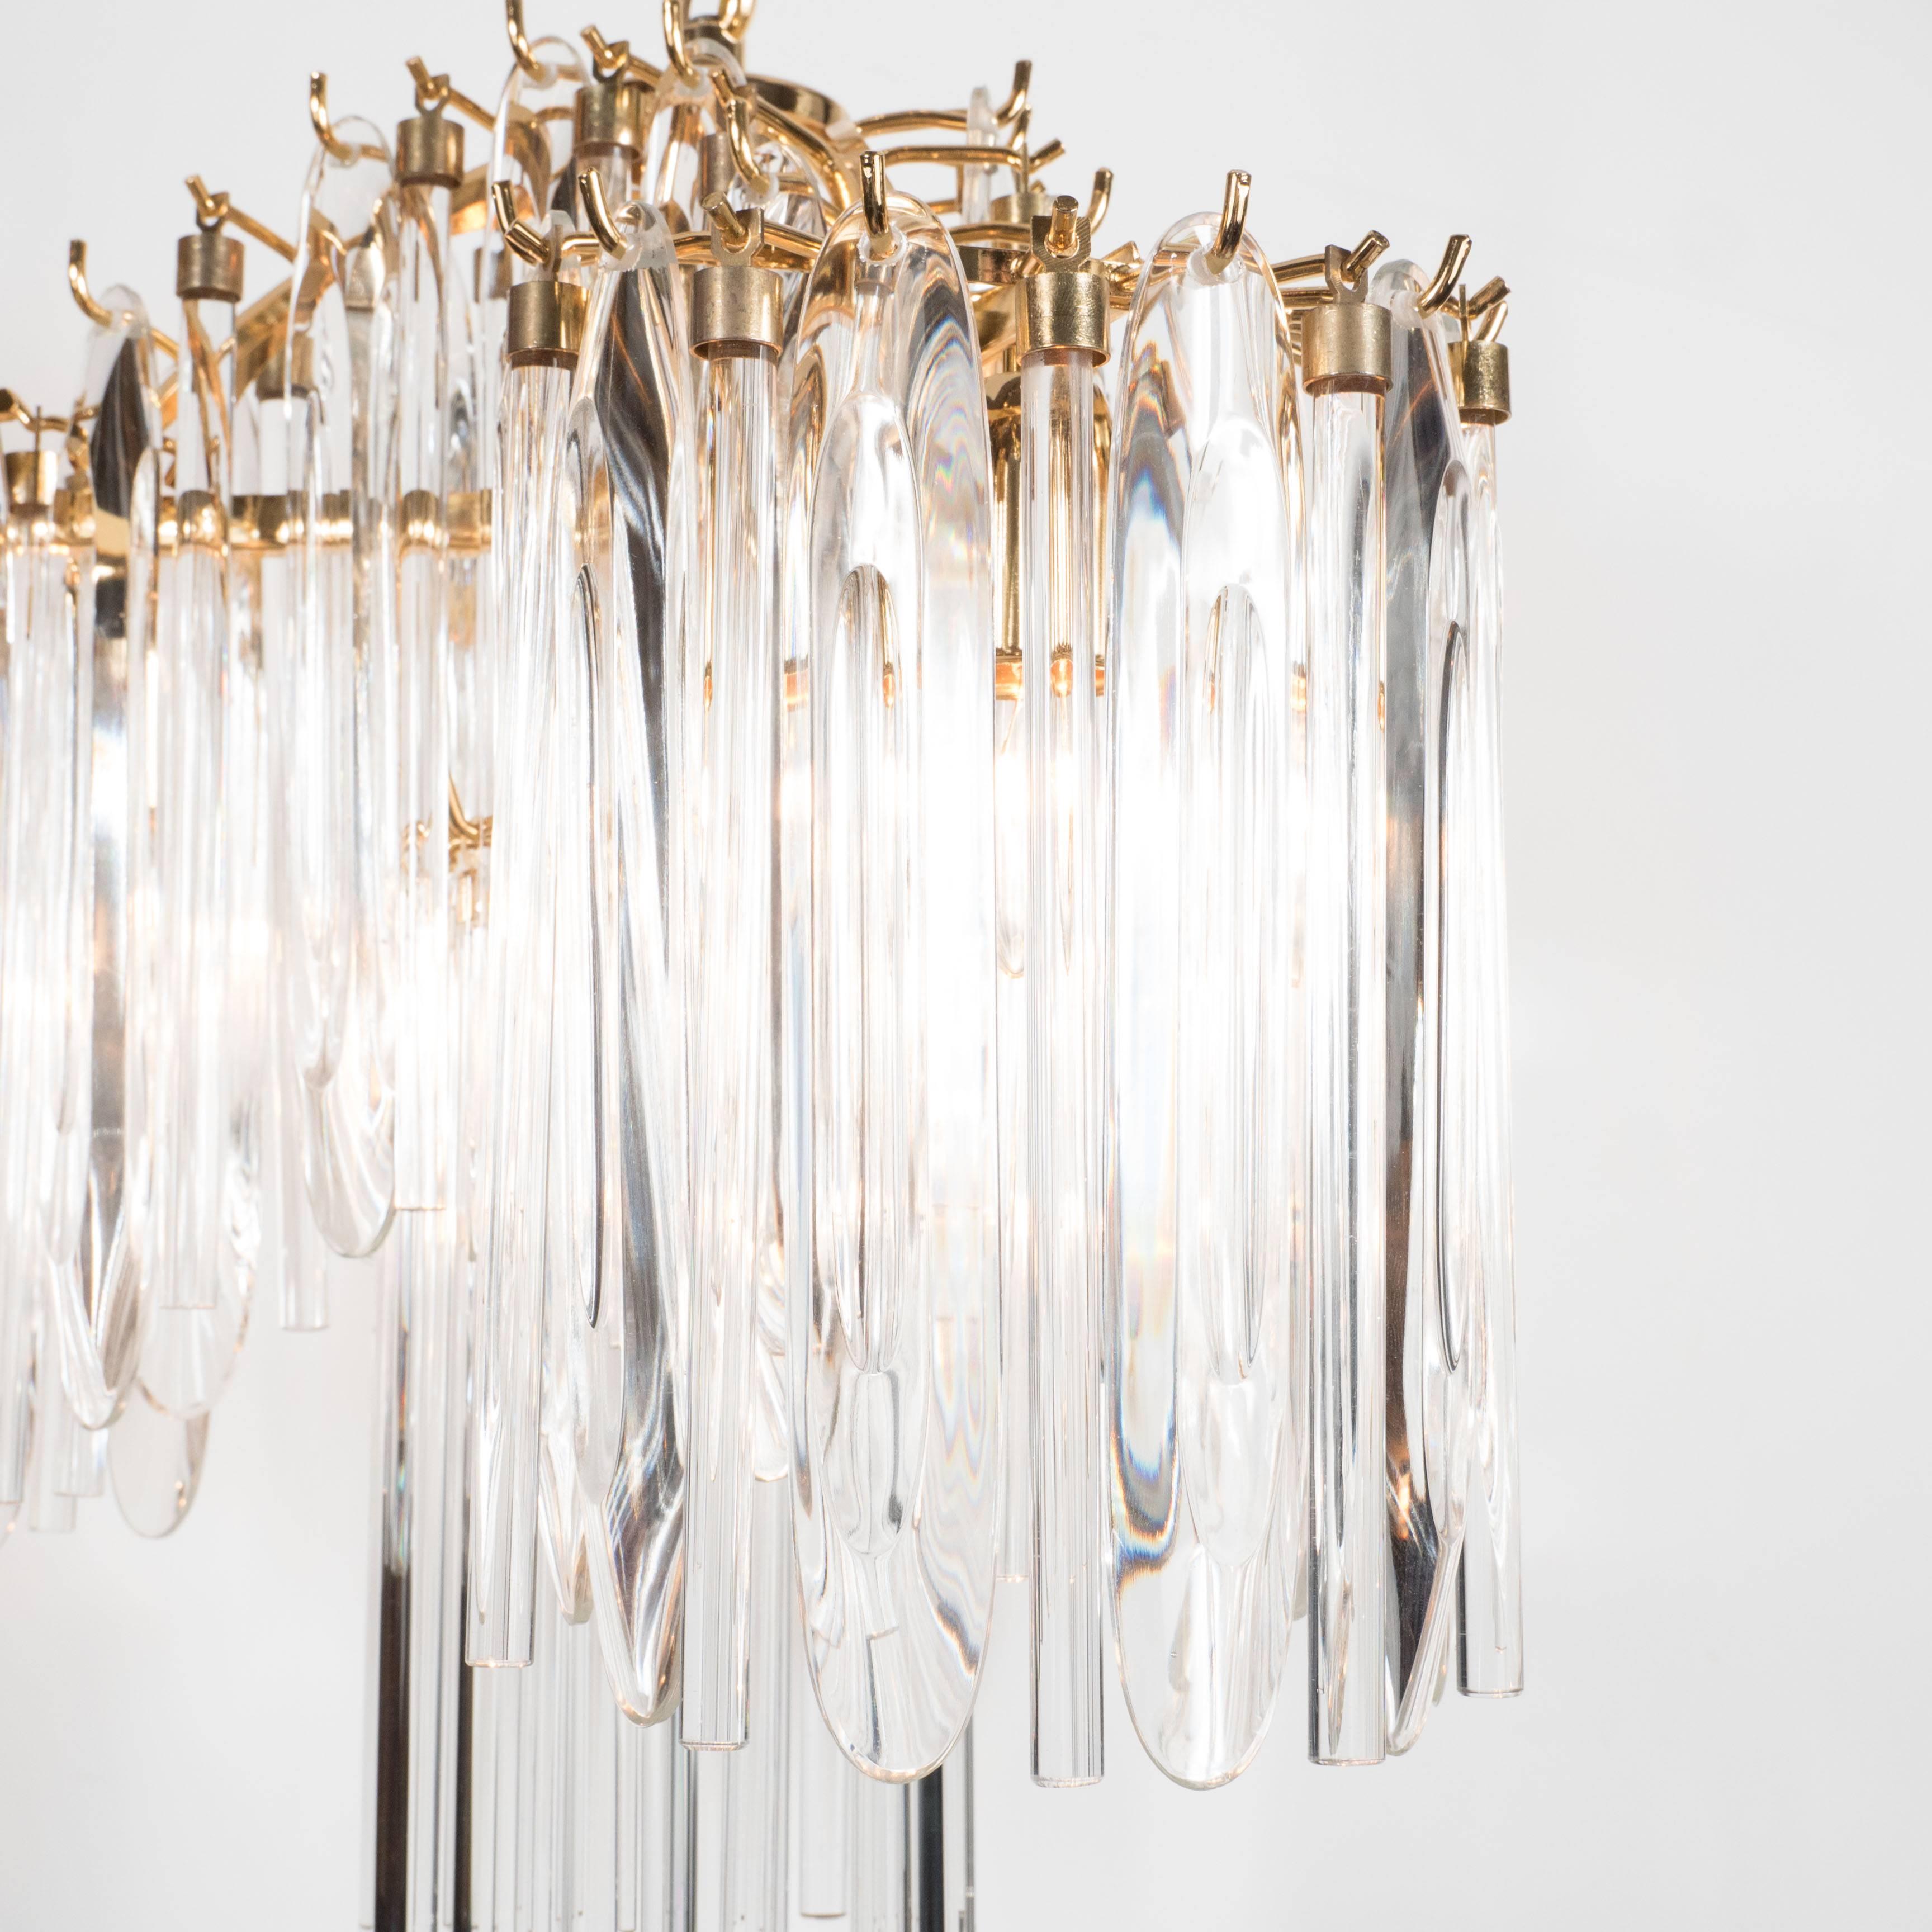 Austrian Mid-Century Draped Chandelier with 24-Karat Gold-Plated Fittings by Lobmeyr